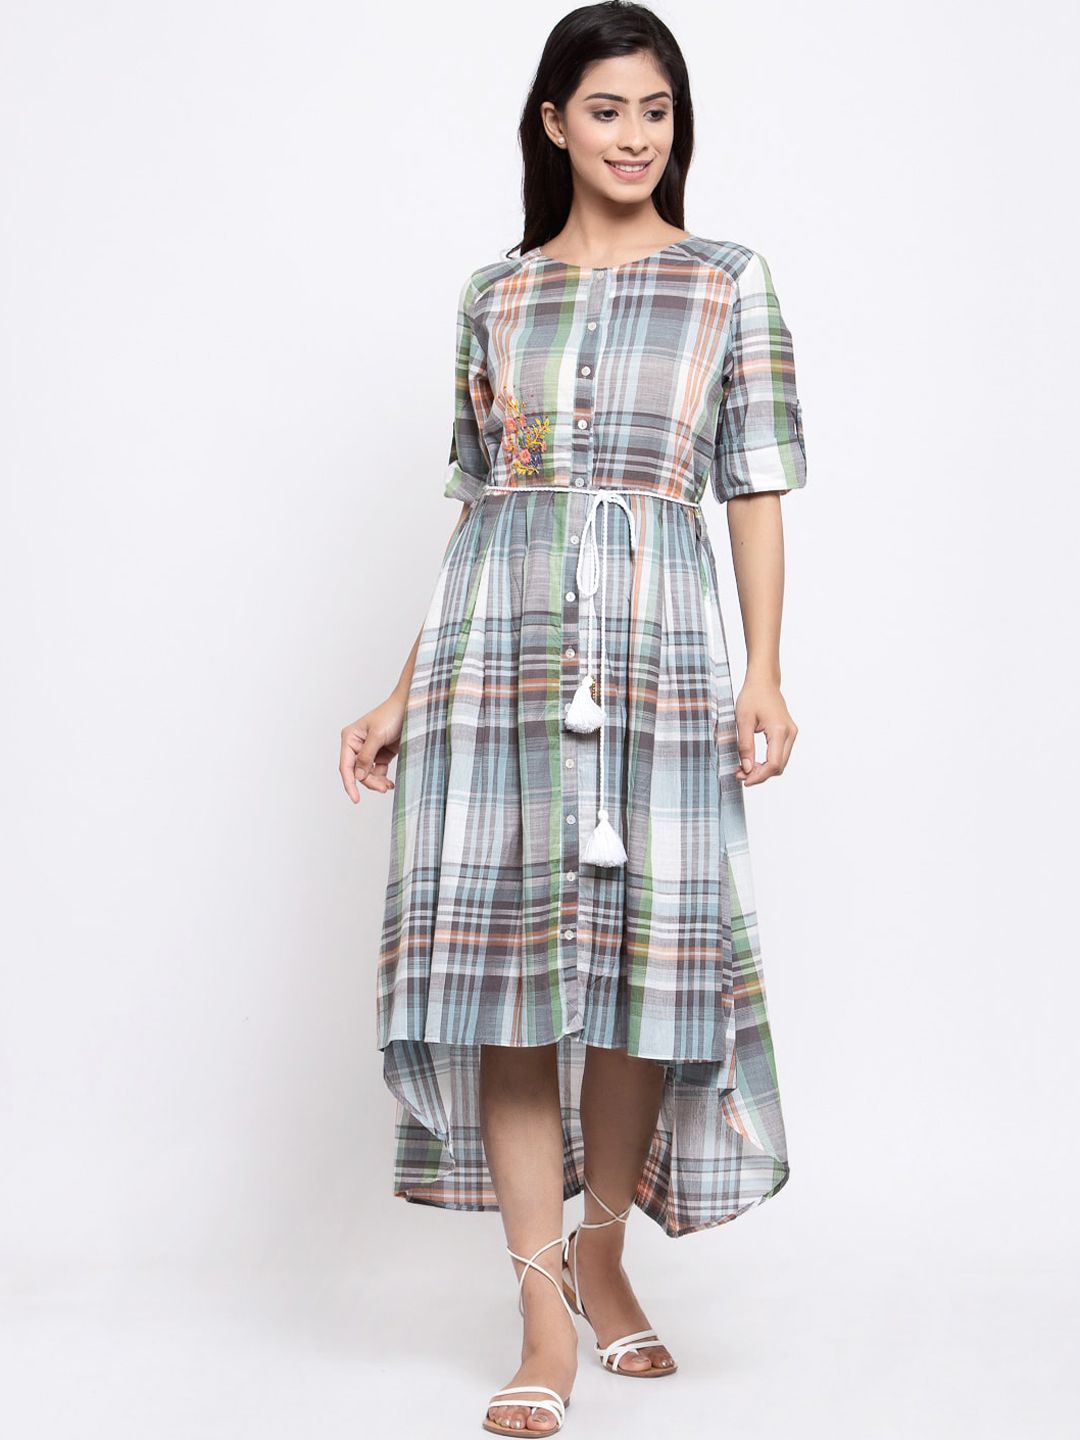 TERQUOIS Women Green Checked Cotton A-Line Dress Price in India